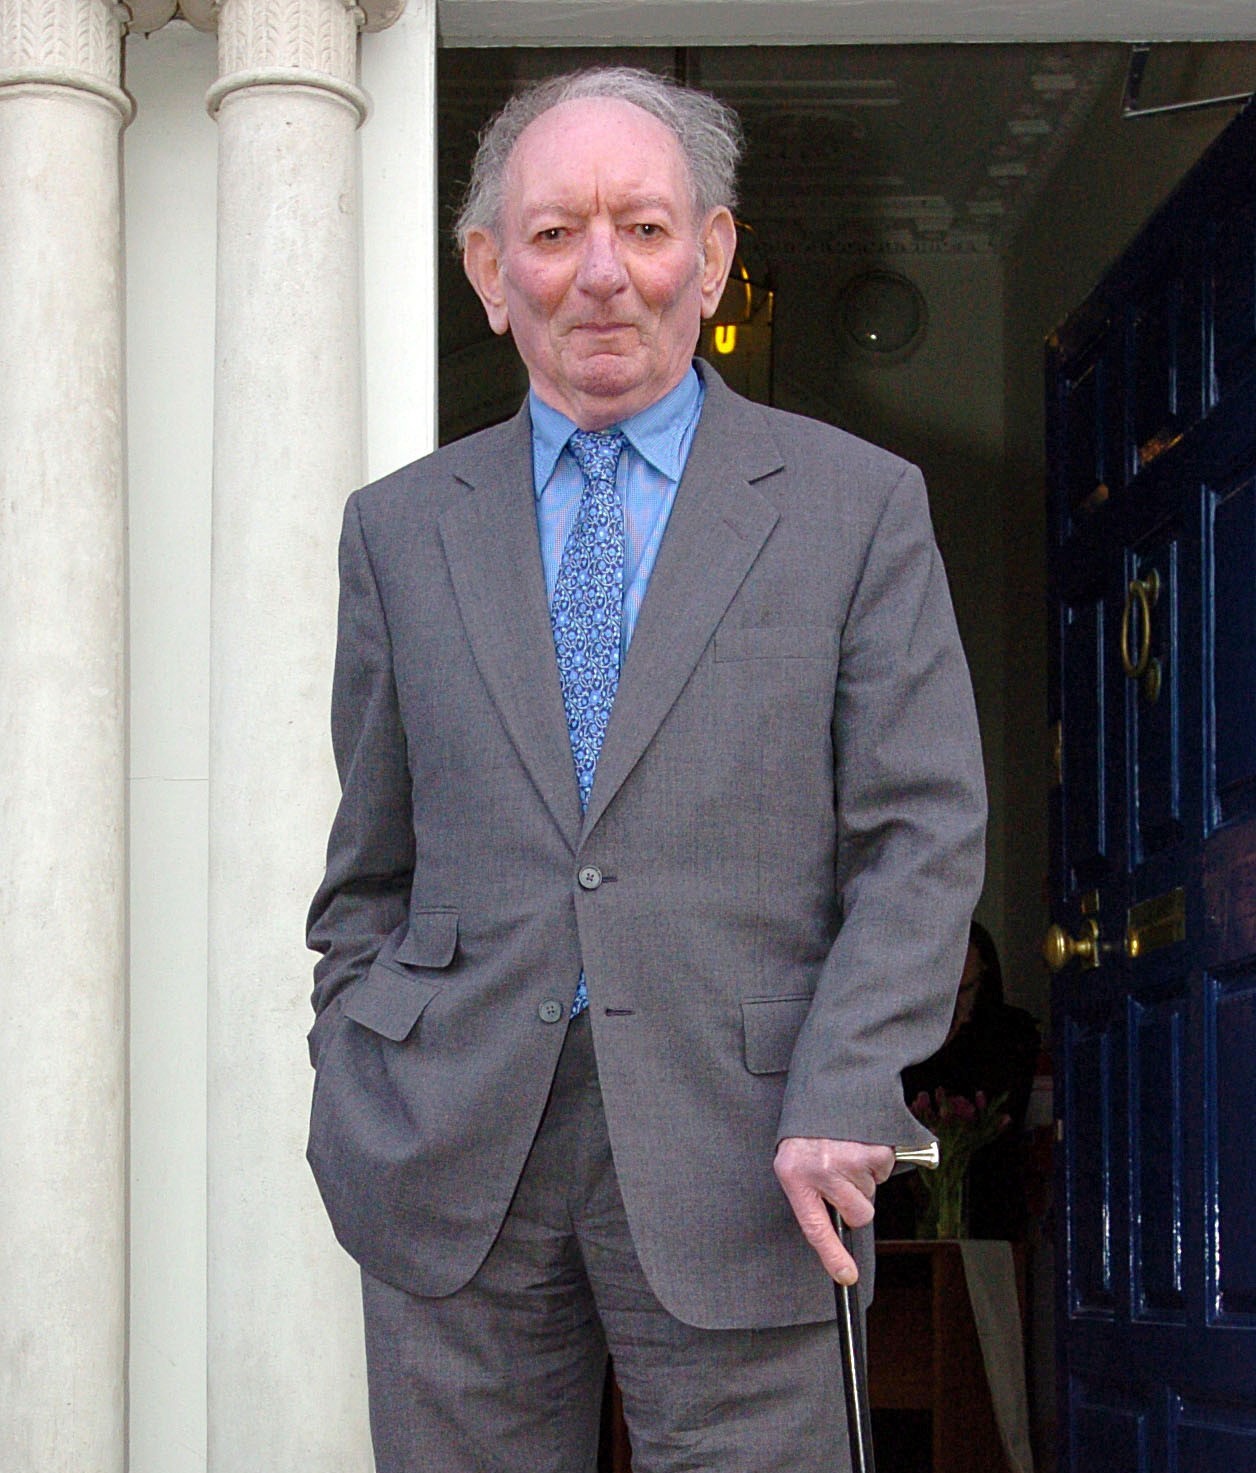 Colour medium distance photograph of Brian Friel, a former Member of Seanad Éireann, in a suit and leaning on a walking stick. He is photographed outside a doorway.